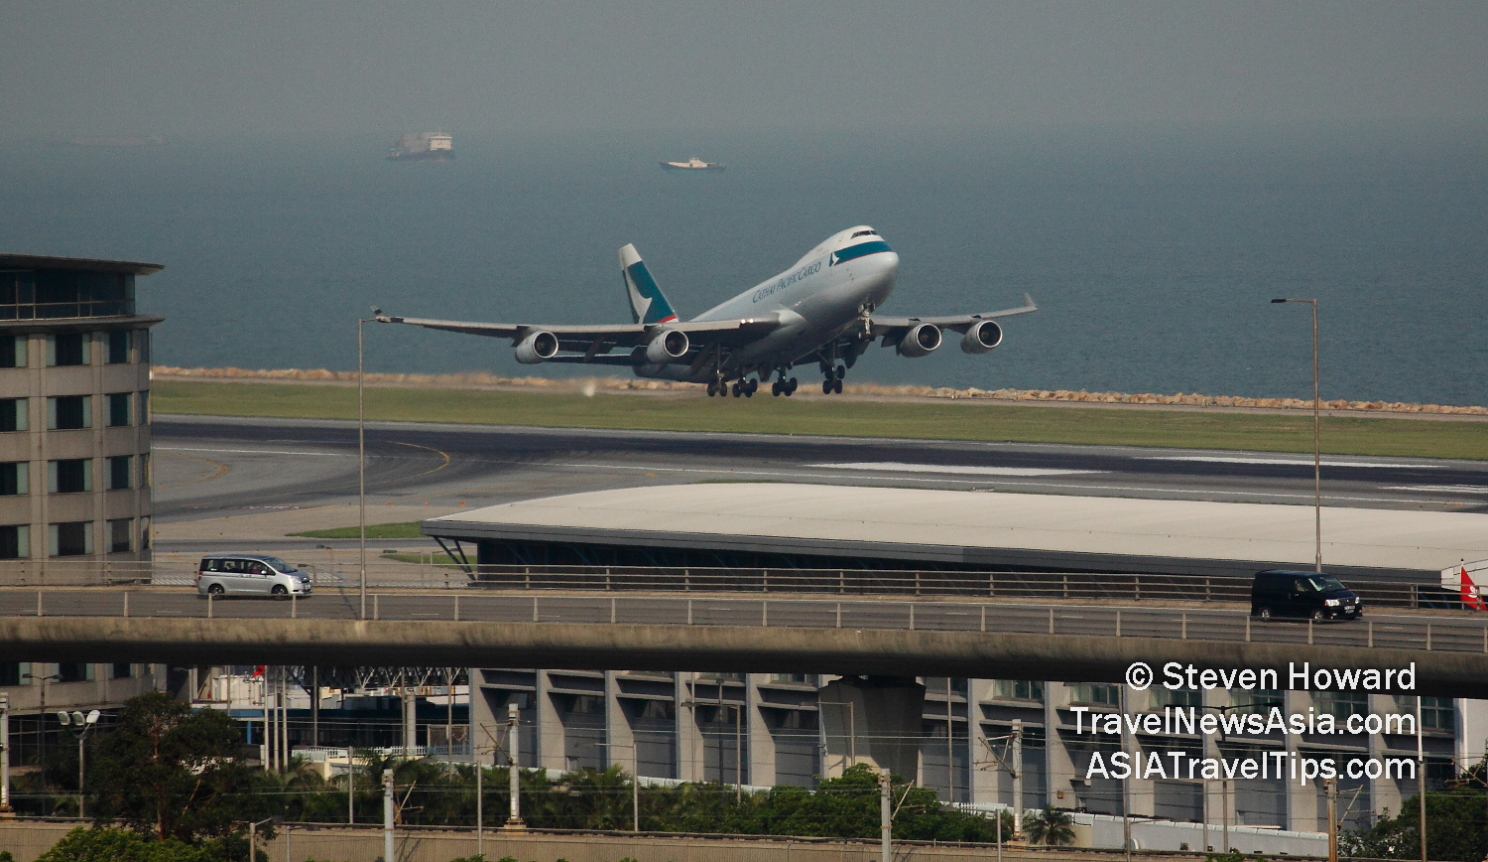 Cathay Pacific Cargo B747F taking off from HKIA. Picture by Steven Howard of TravelNewsAsia.com Click to enlarge.